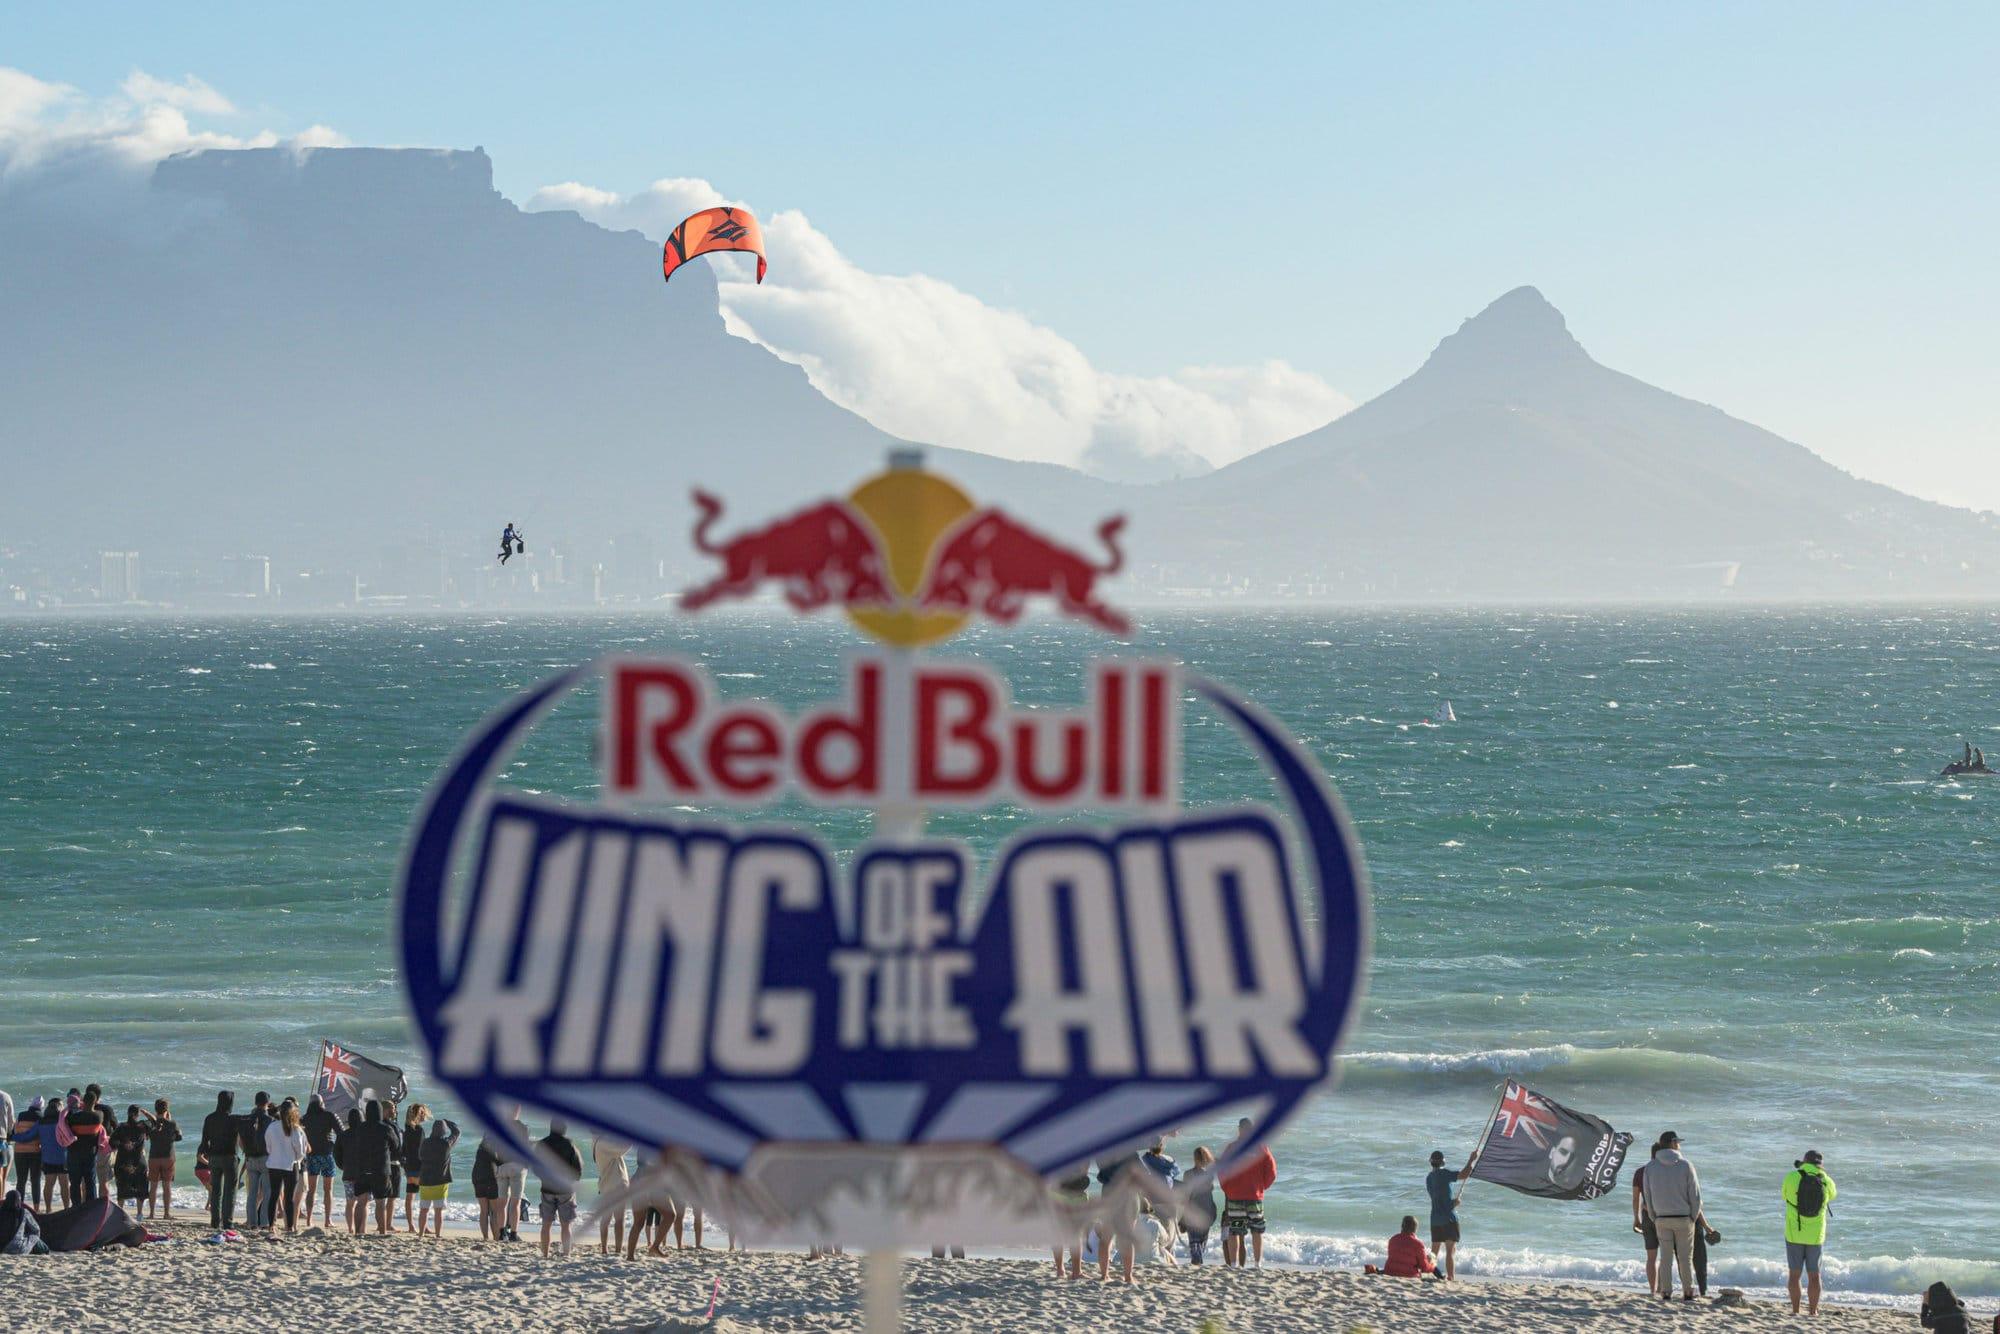 First King of the Air, First Podium Finish for Stig Hoefnagel - Naish.com